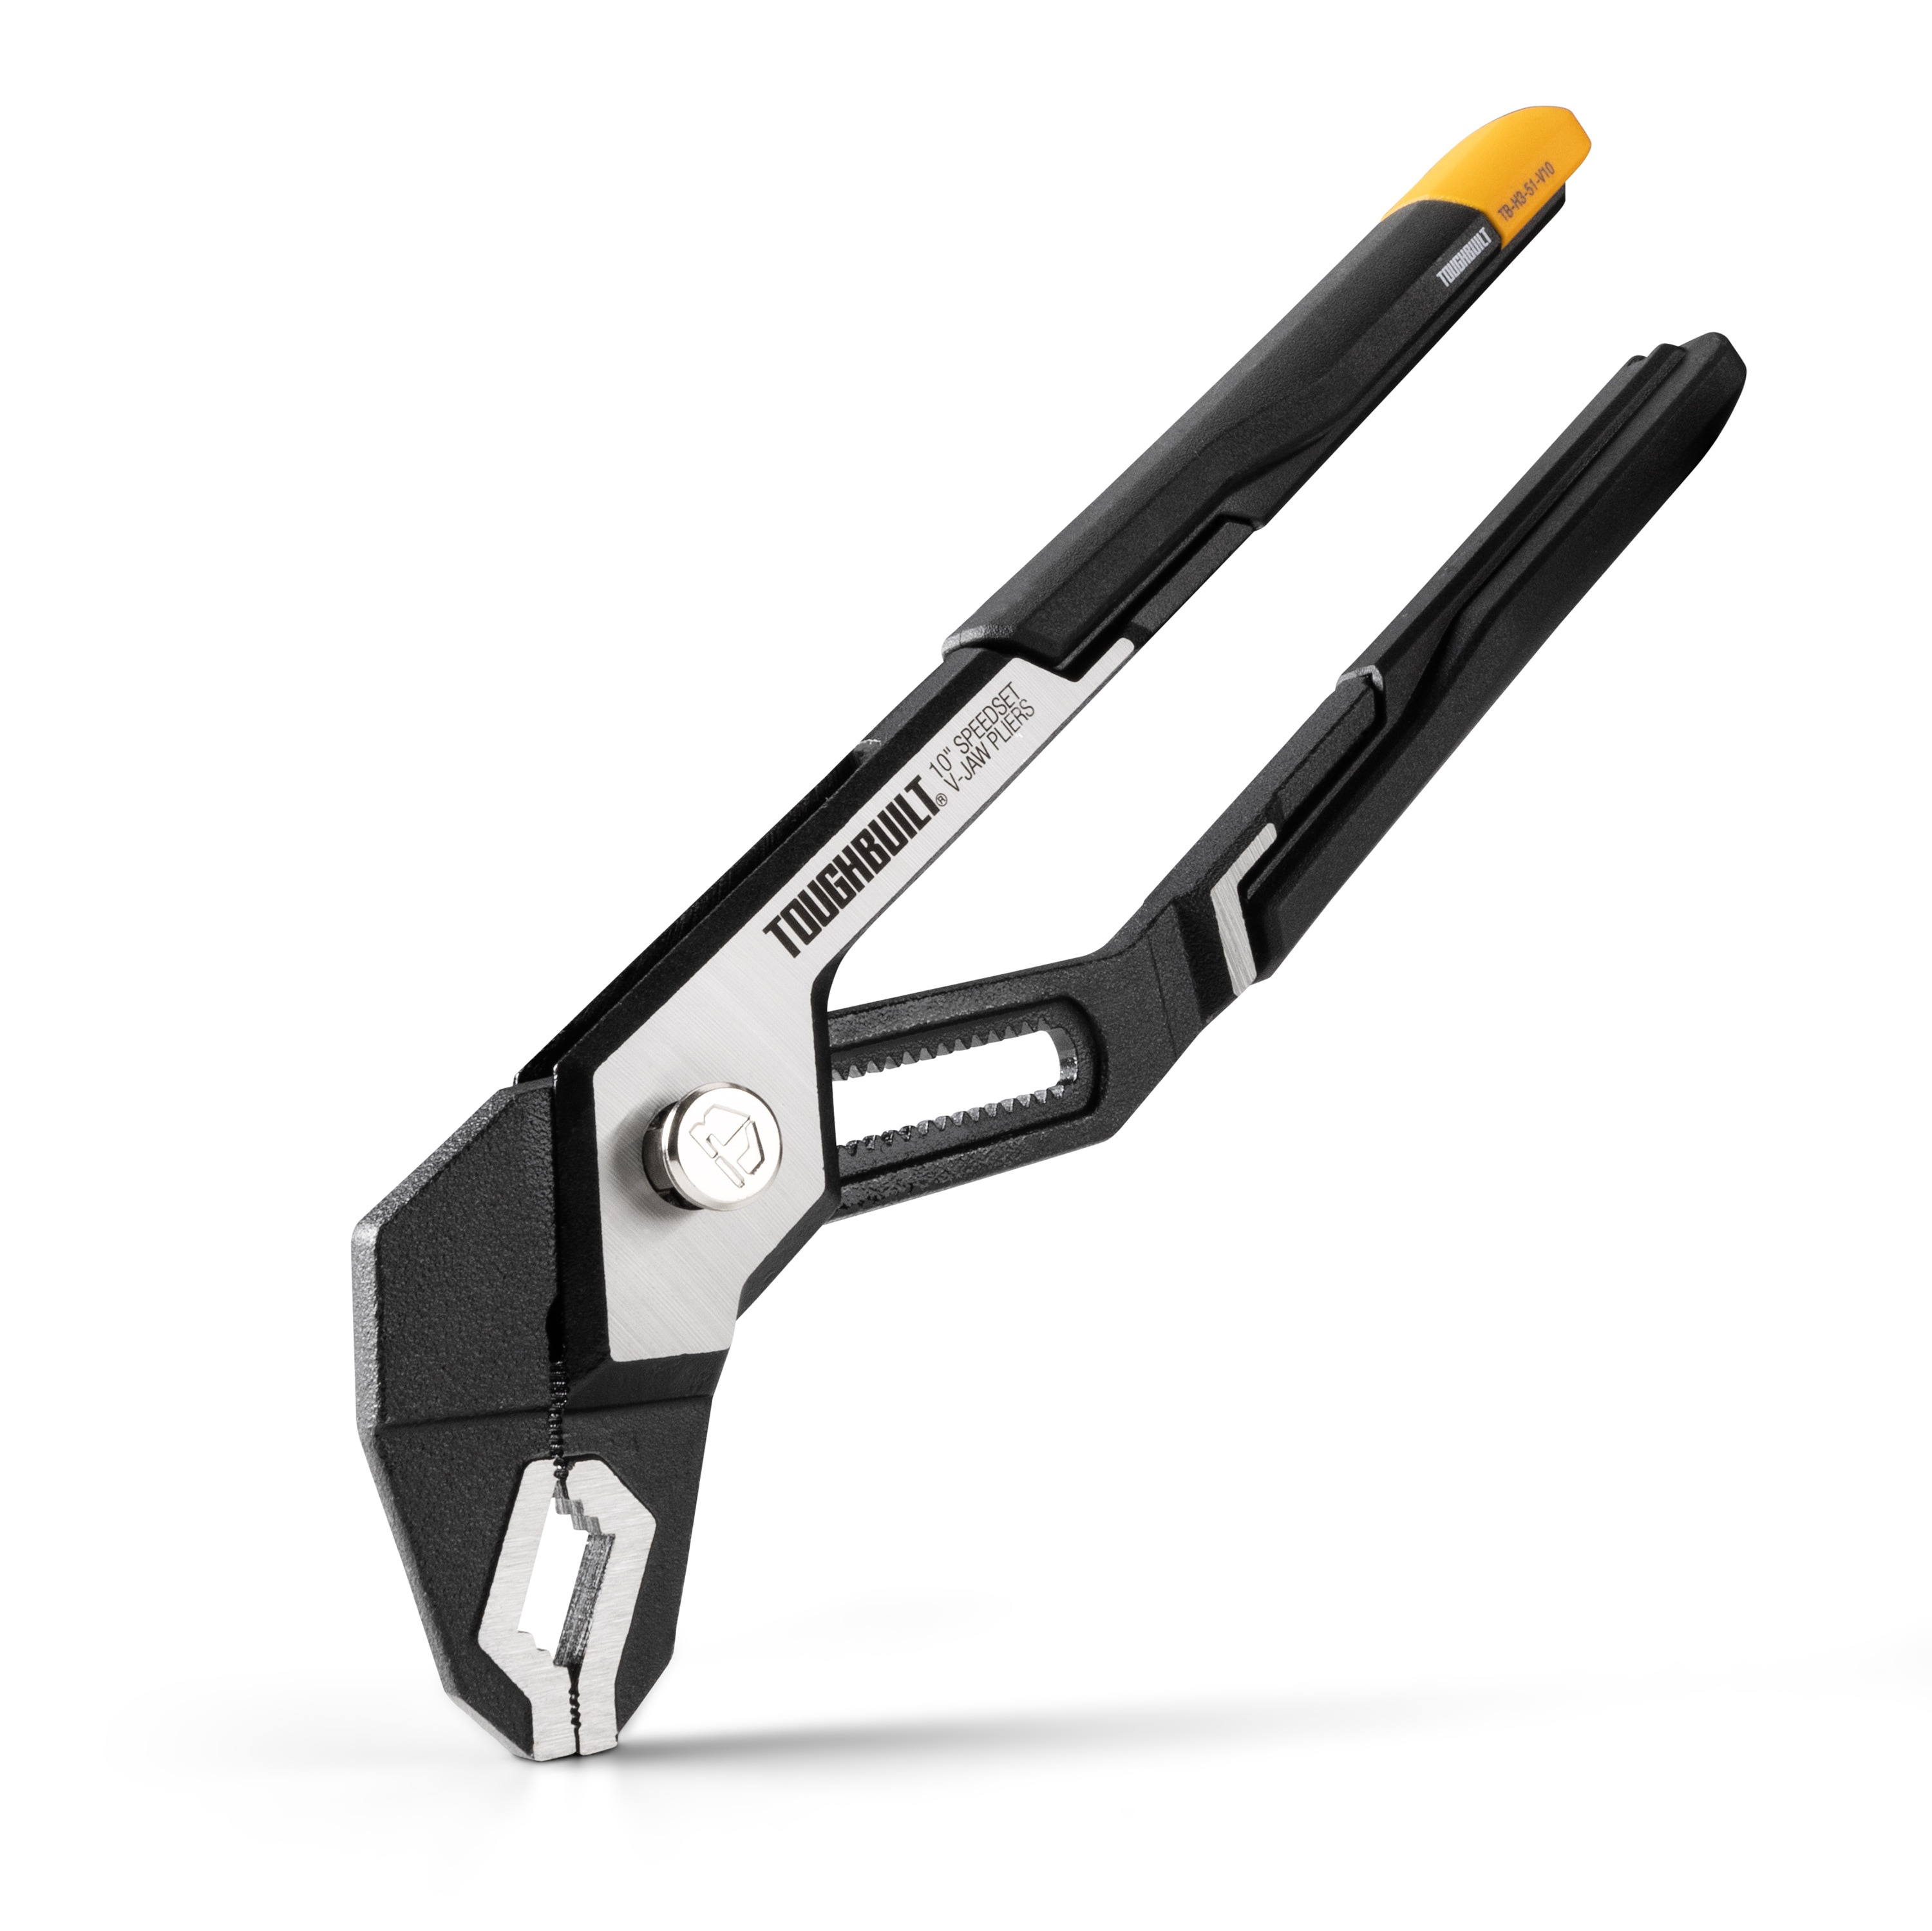 TOUGHBUILT 10-in Universal Tongue and Groove Pliers in the Pliers